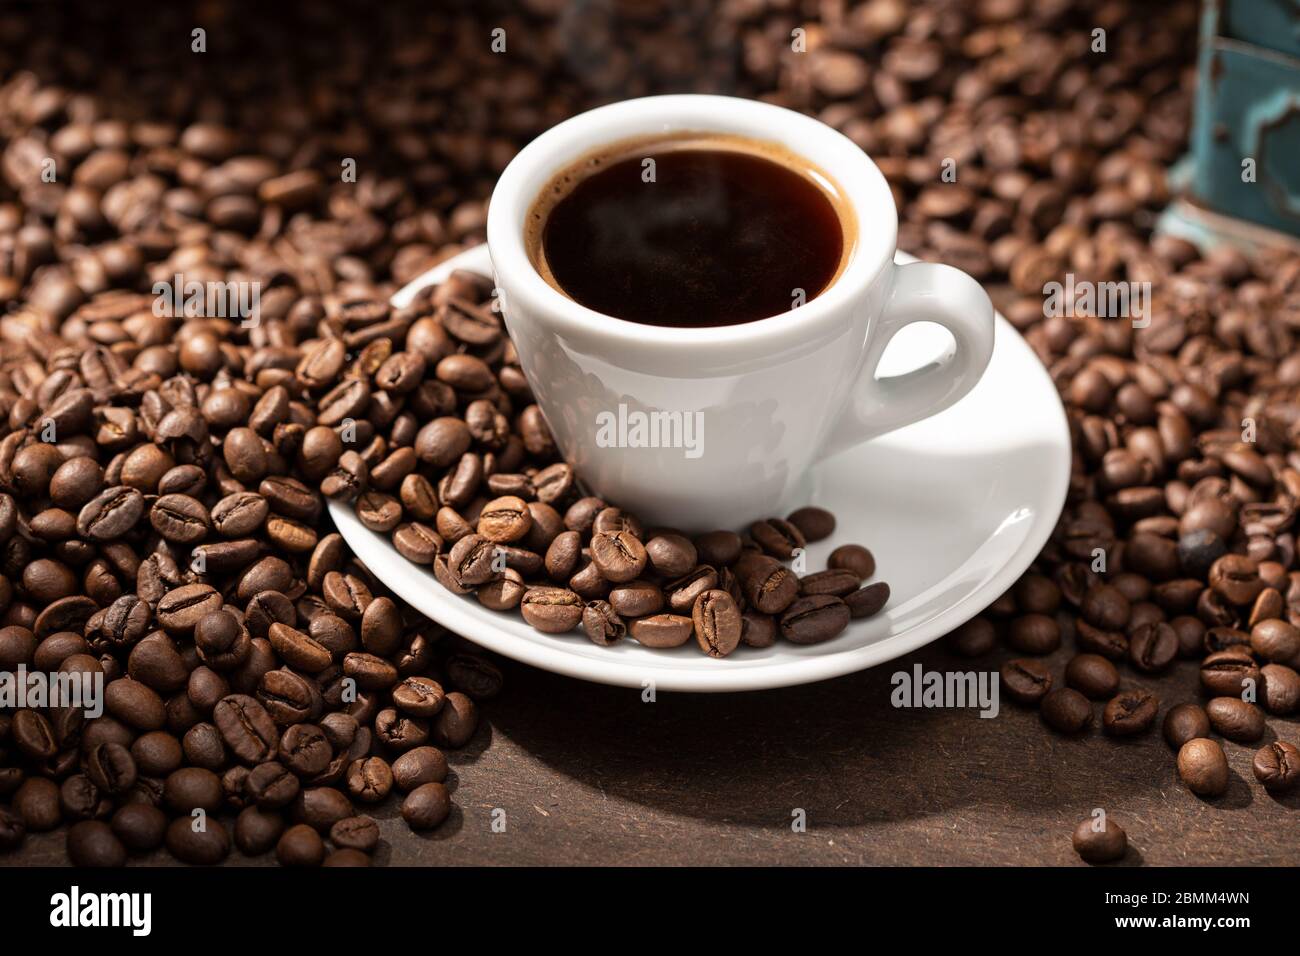 Espresso Coffee cup and roasted beans. Coffee background Stock Photo